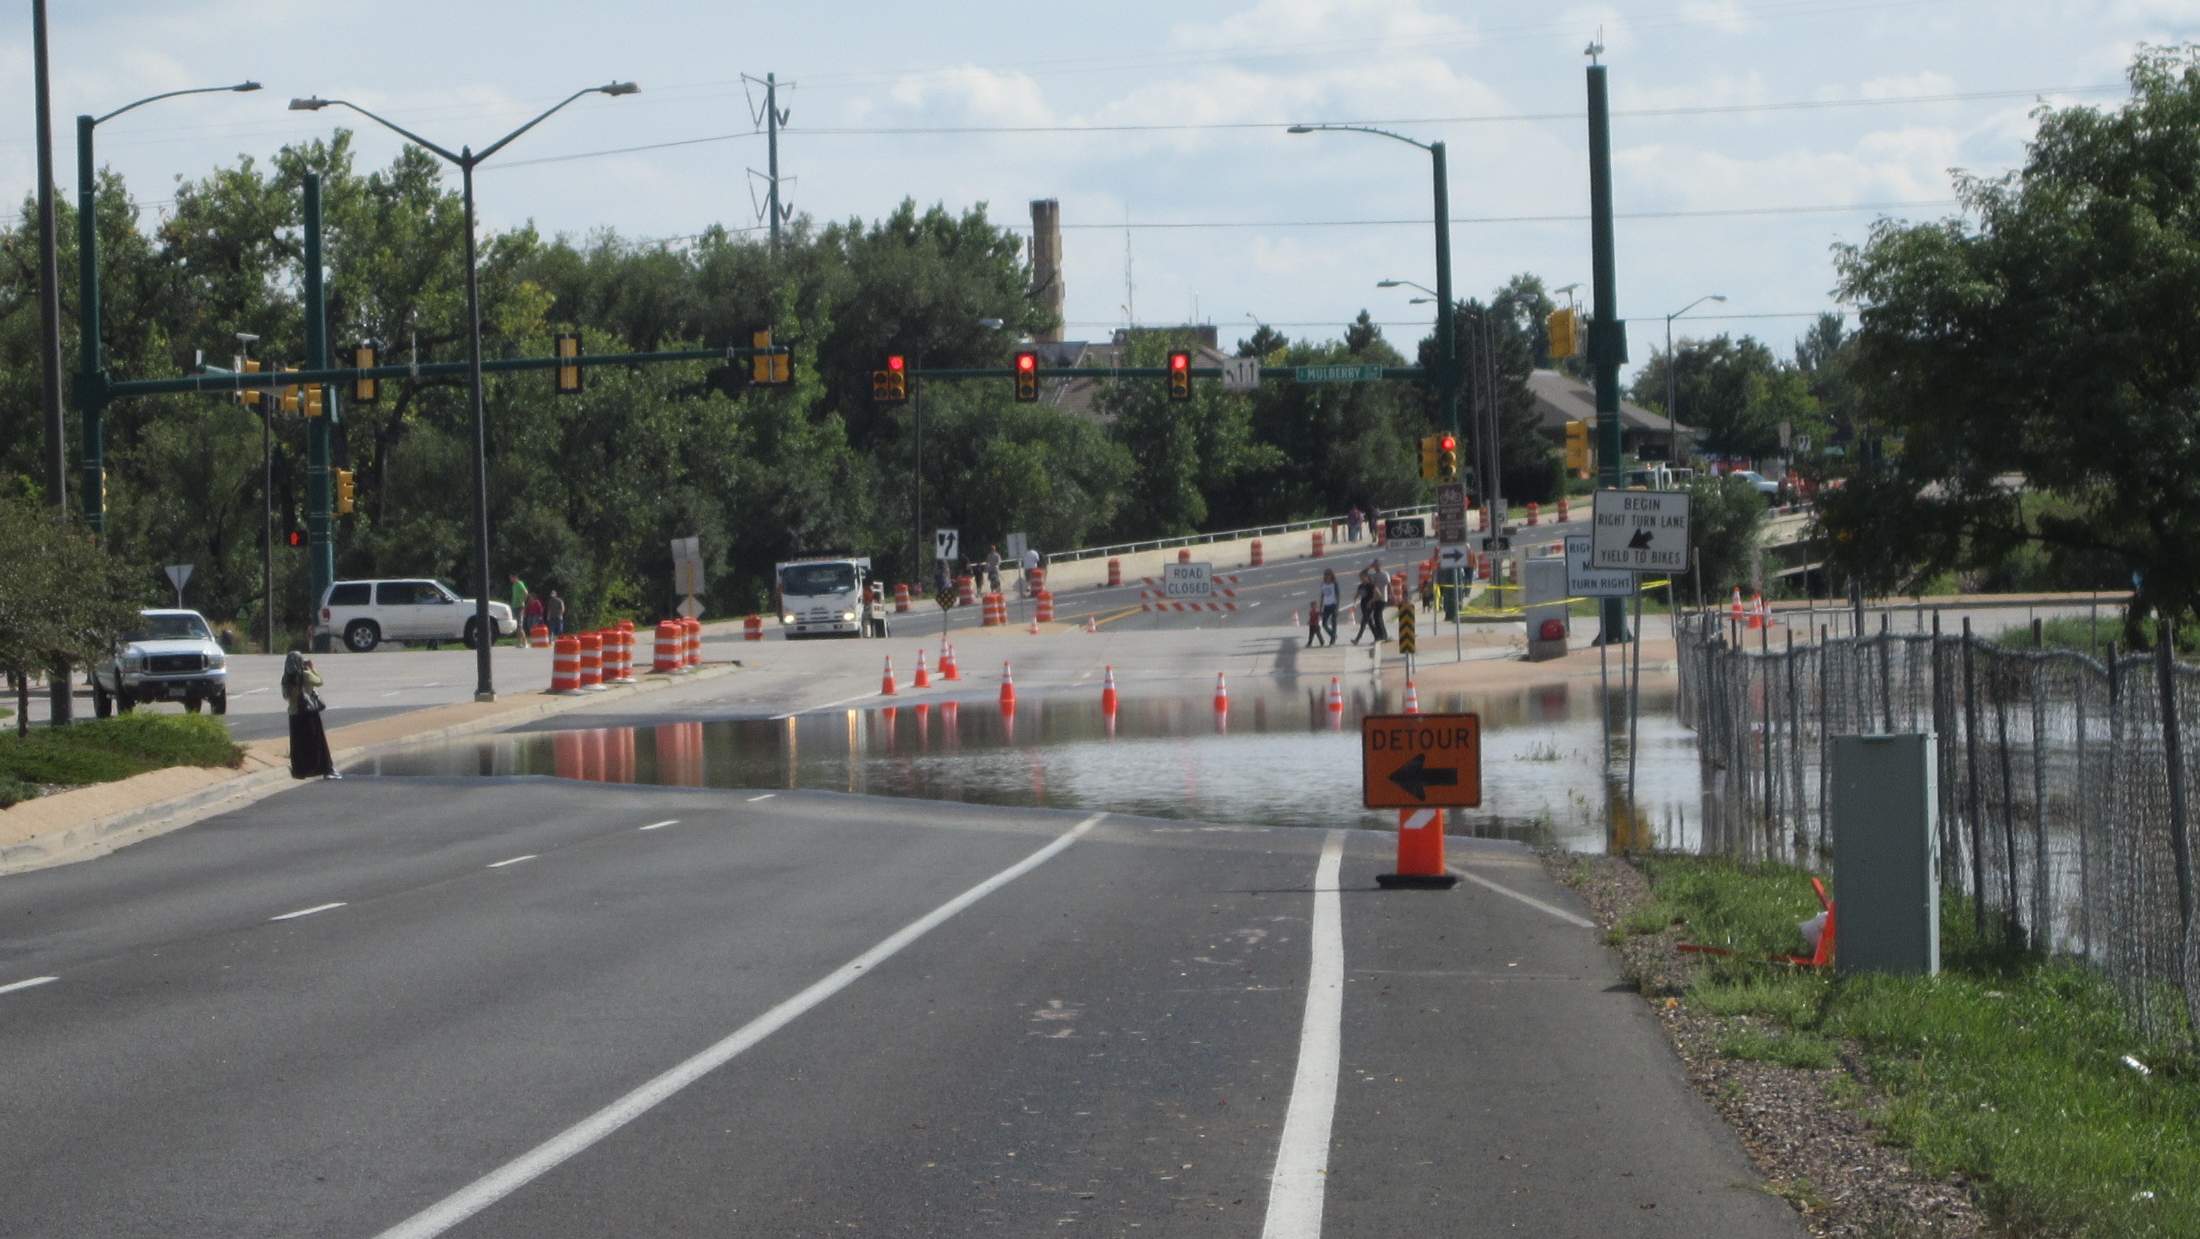 This is how the Lemay & E. Mulberry intersection in Fort Collins looked like after four days of crazy rain.